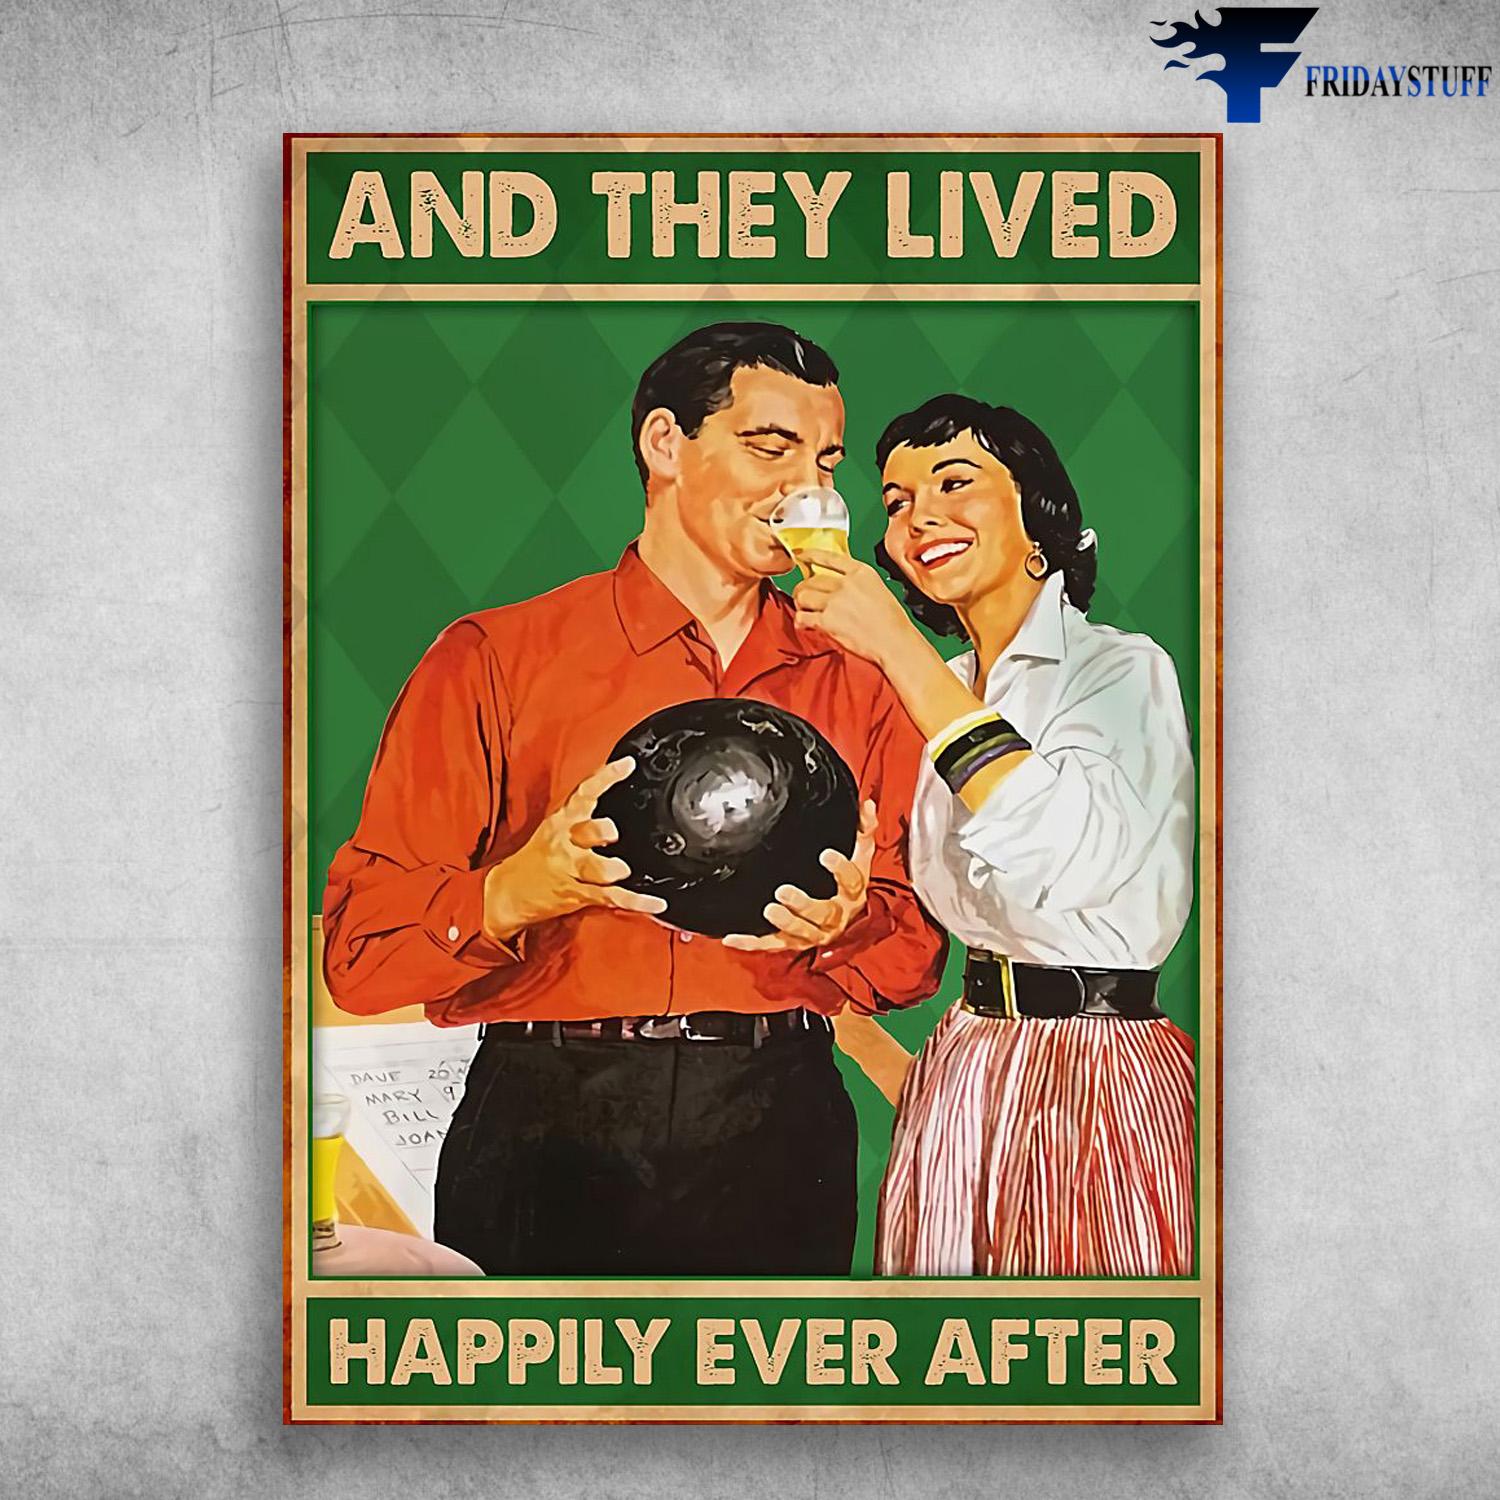 Bowling Couple, Bowling Poster, Bowling With Beer, And They Lived, Happily Ever After